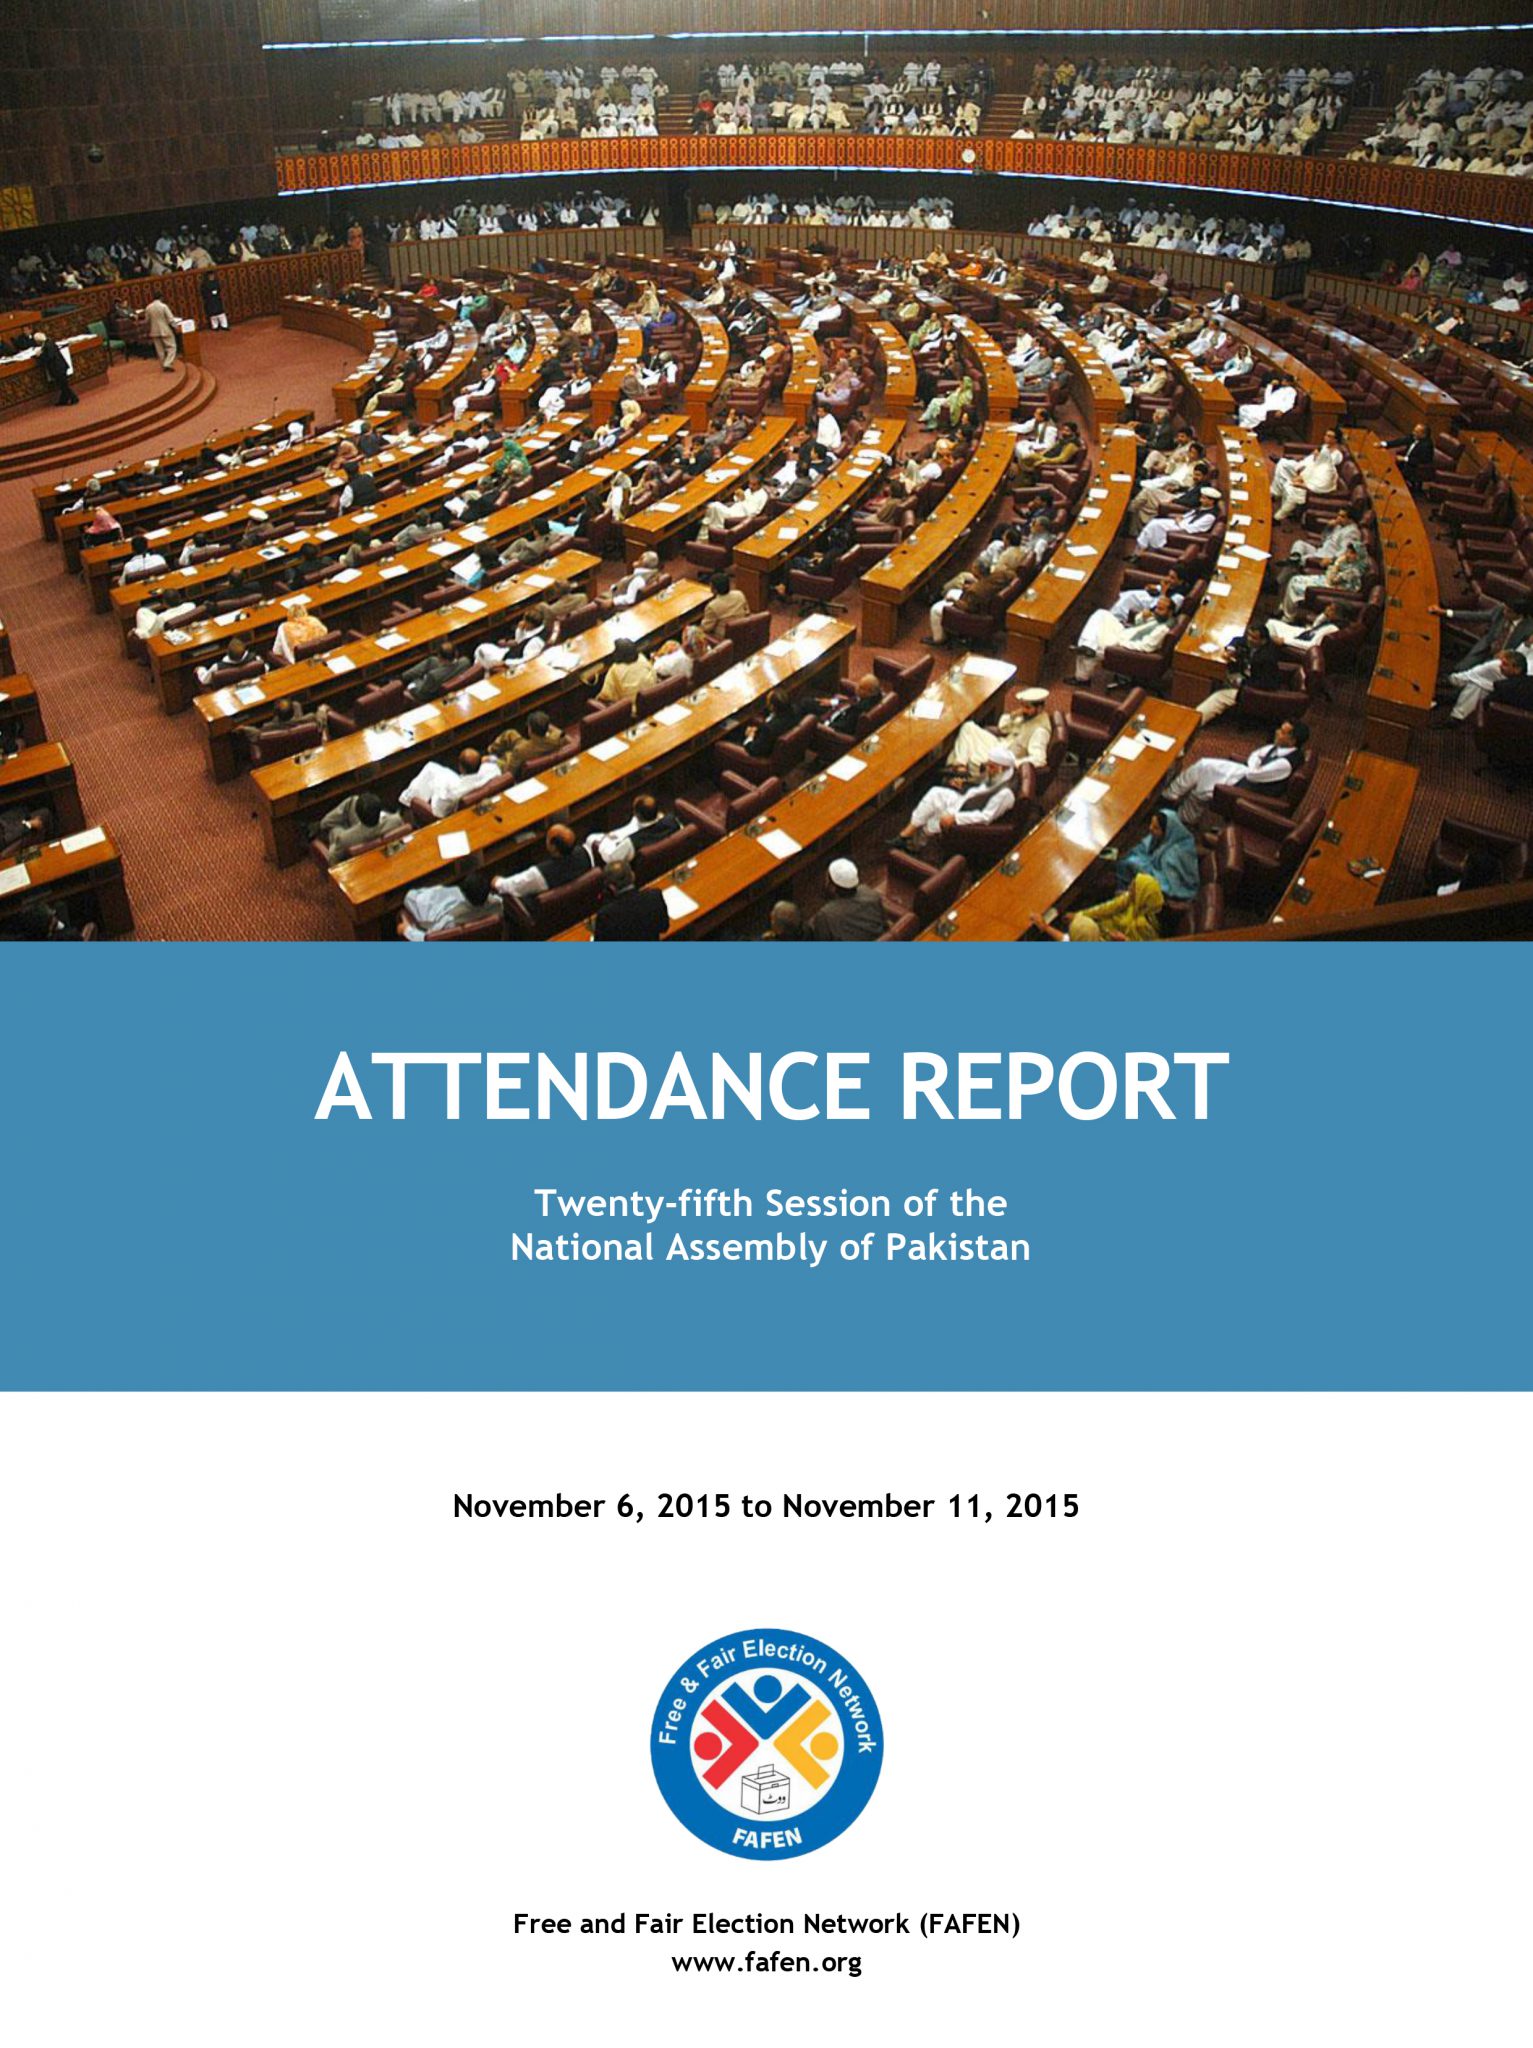 National Assembly 25th Session Attendance Report Card